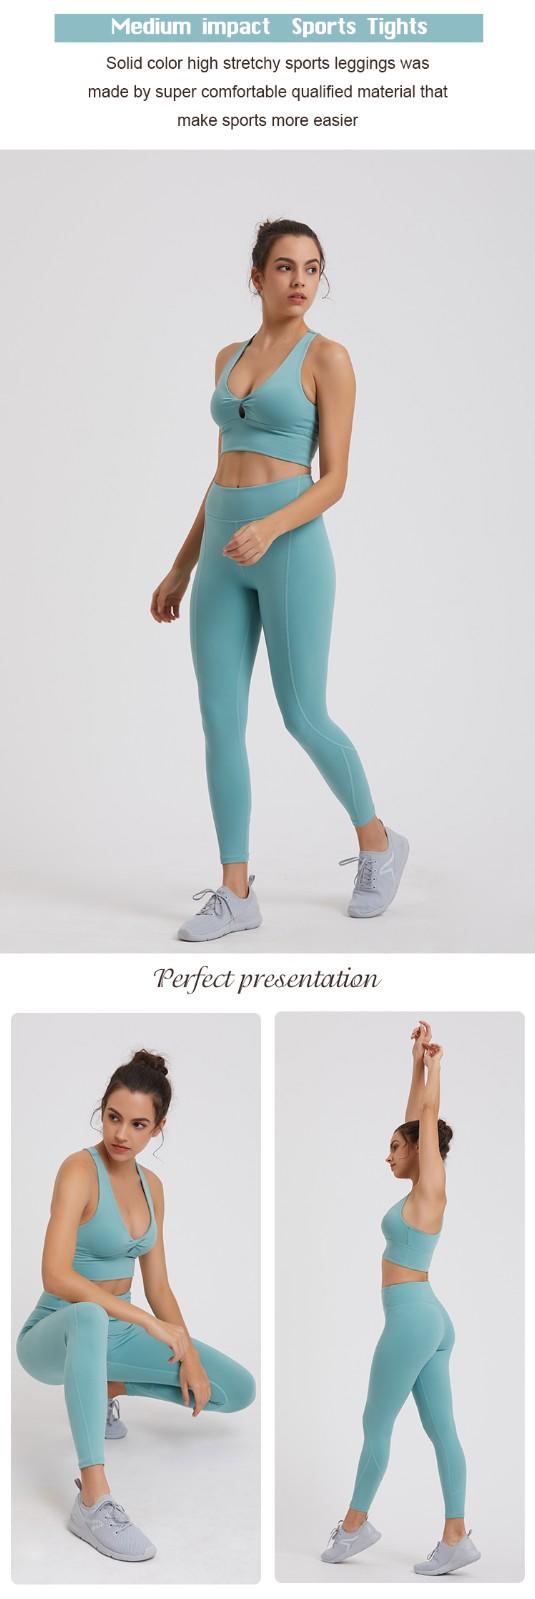 INGOR personalized yoga outfit for ladies owner for sport